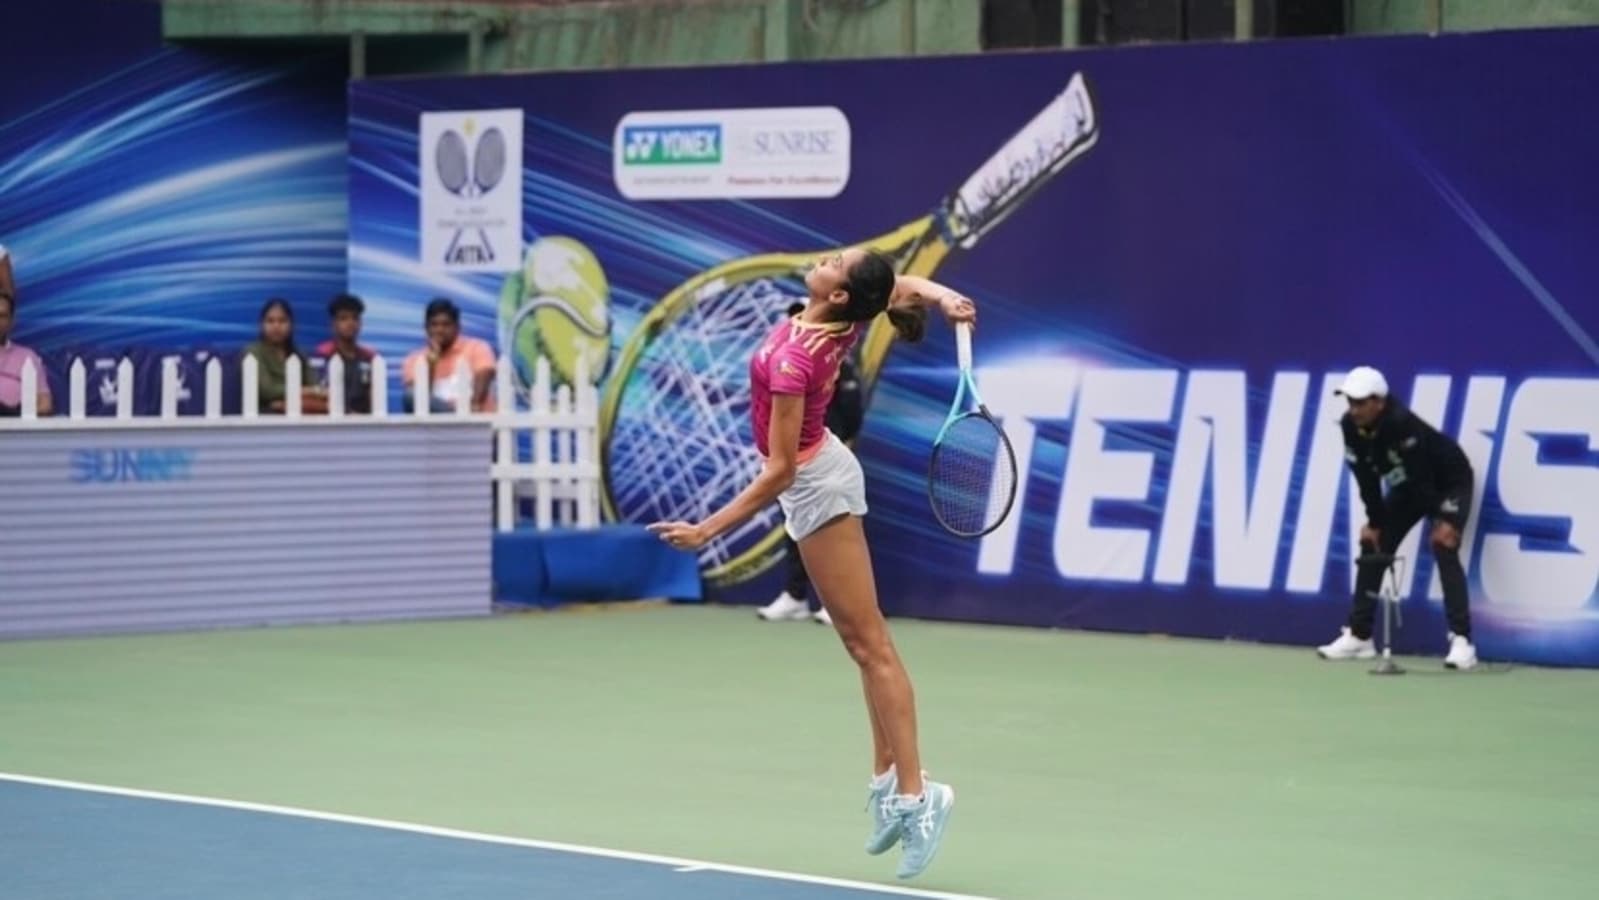 Bengaluru Spartans displace Finecab Hyderabad strikers from top spot at end of day 2 of Tennis Premier League